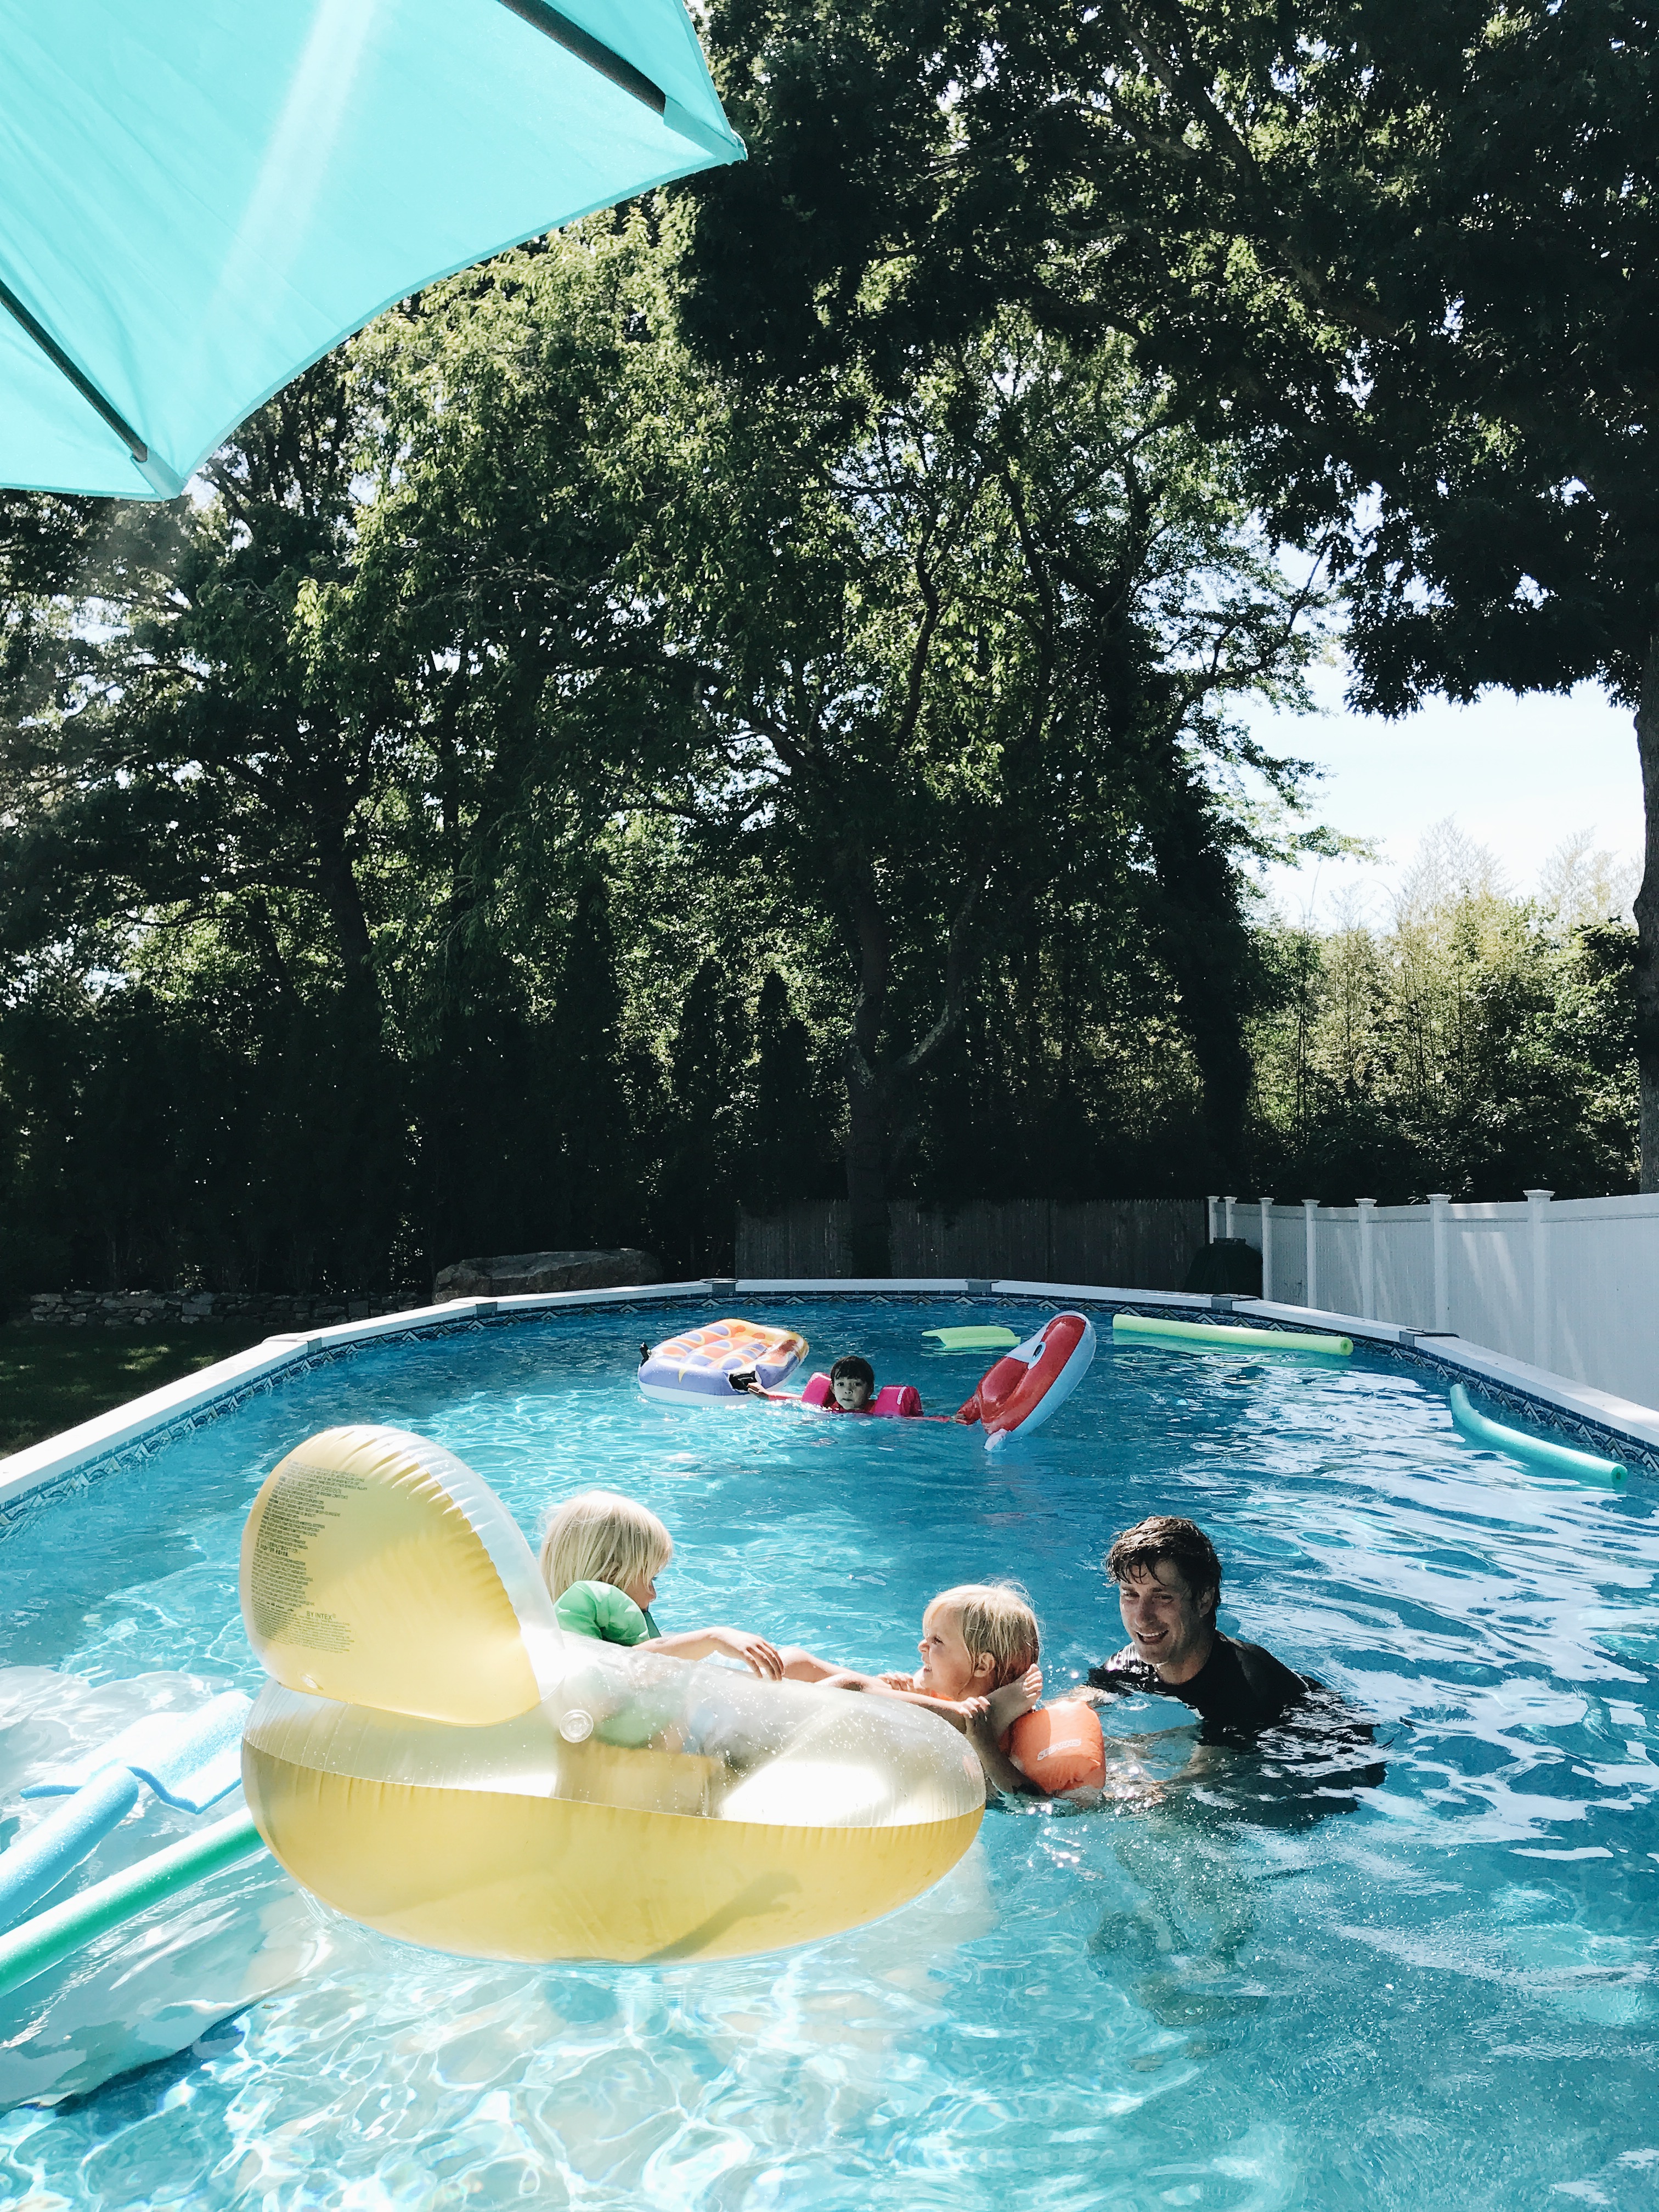 Summertime in Connecticut / Bev Cooks